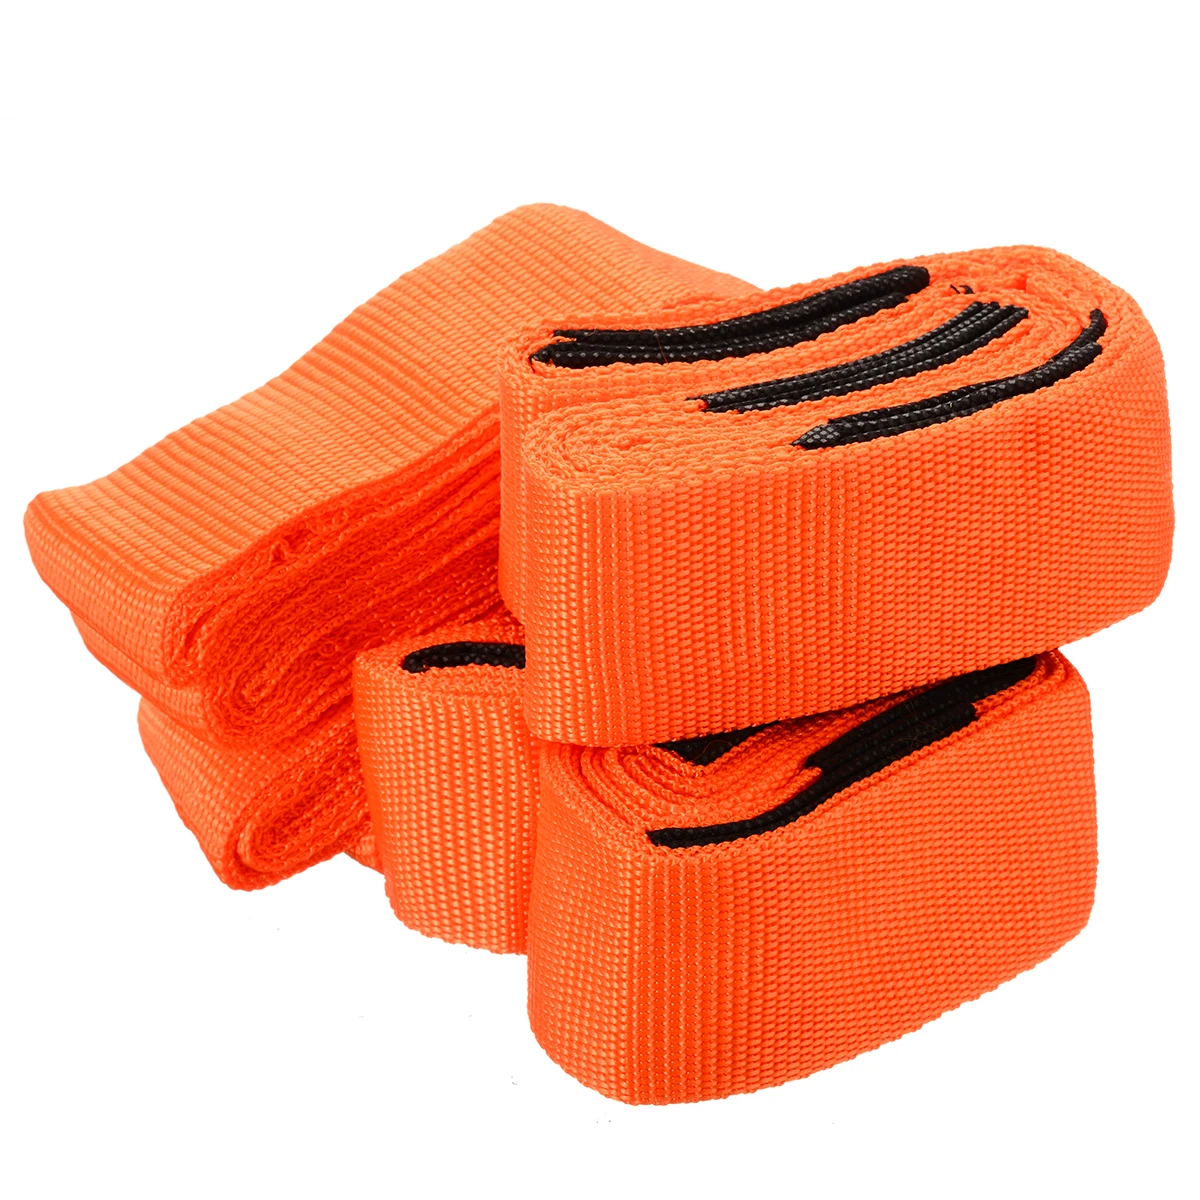 4pcs Furniture Lifting Moving Straps Harnesses Heavy Duty Furniture Cargo Movers Lifter Convenient Shoulder Wrist Aid Belt Tool